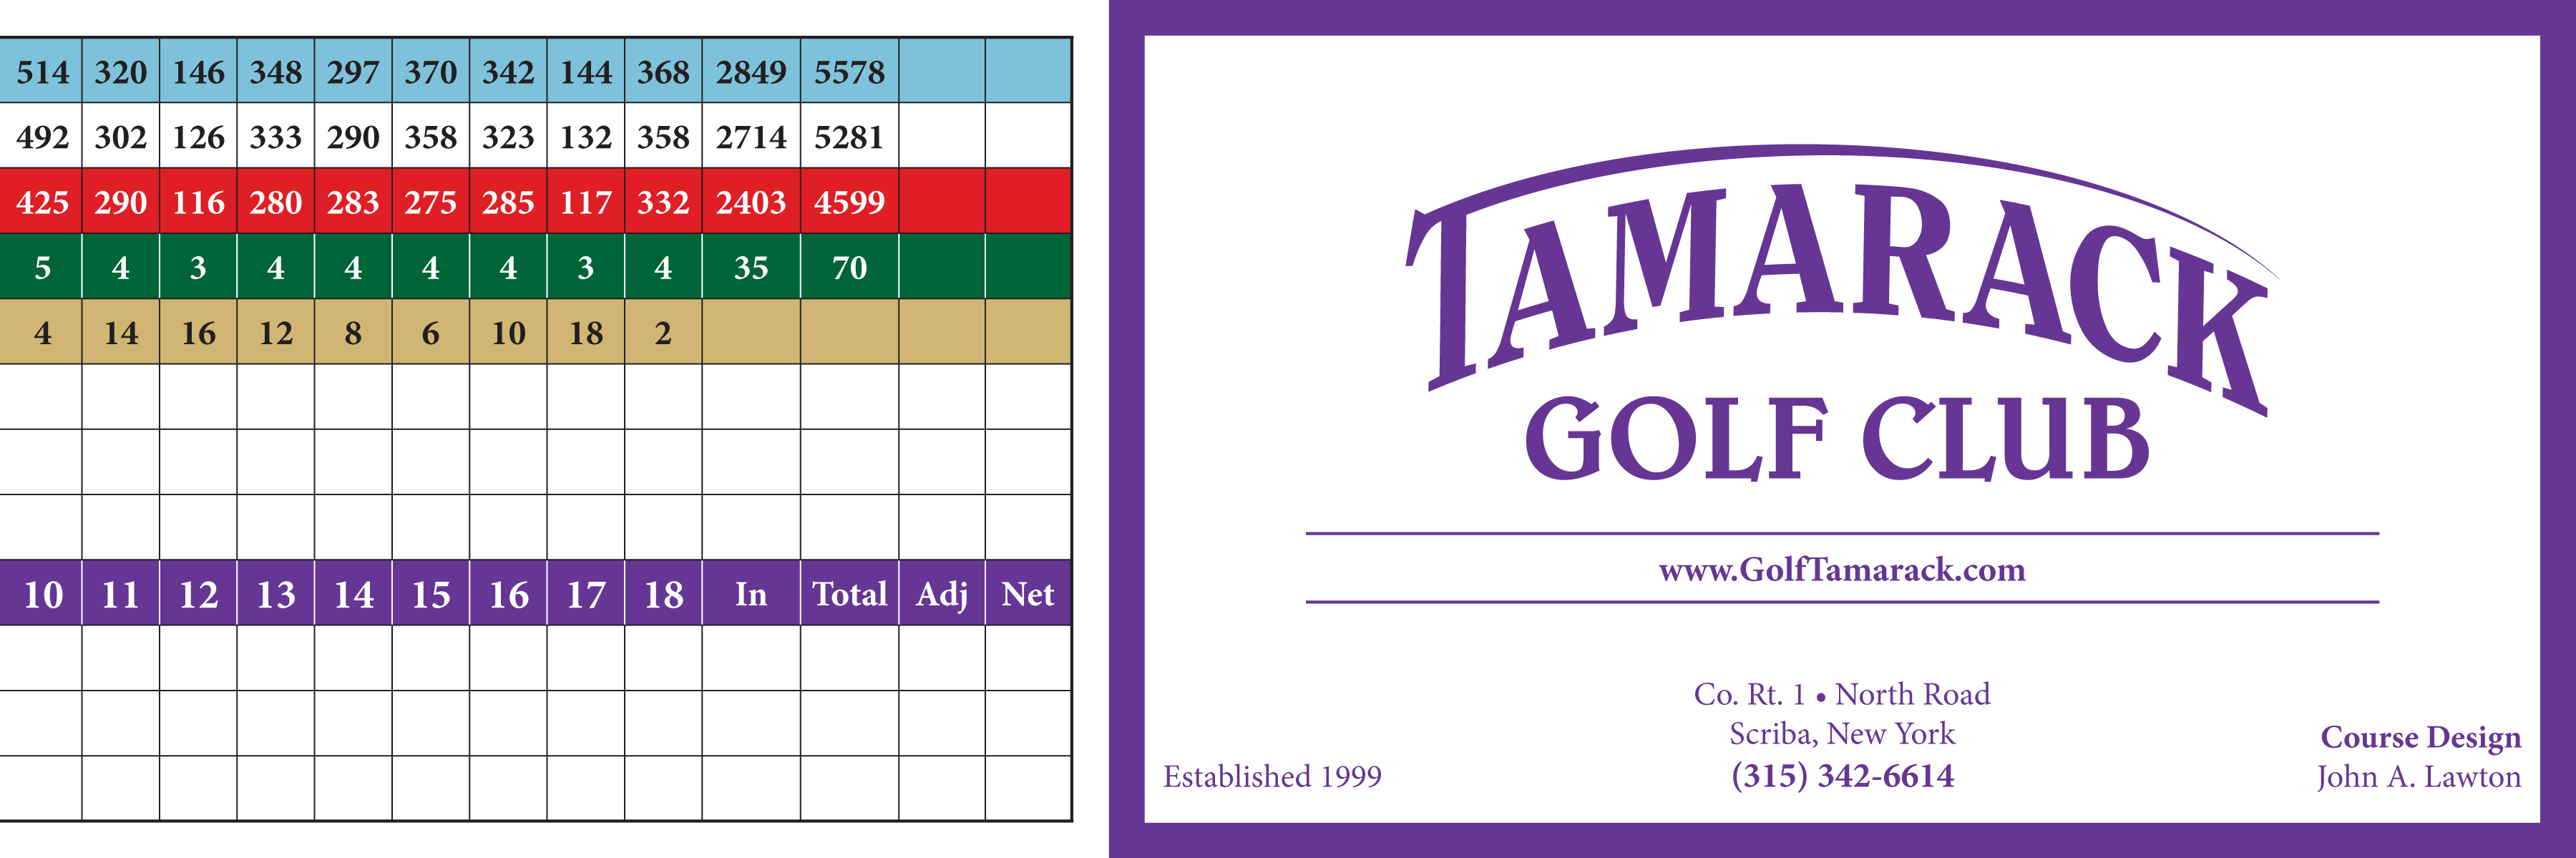 Image of the back of the score card at Tamarack Golf Club in Oswego, NY.